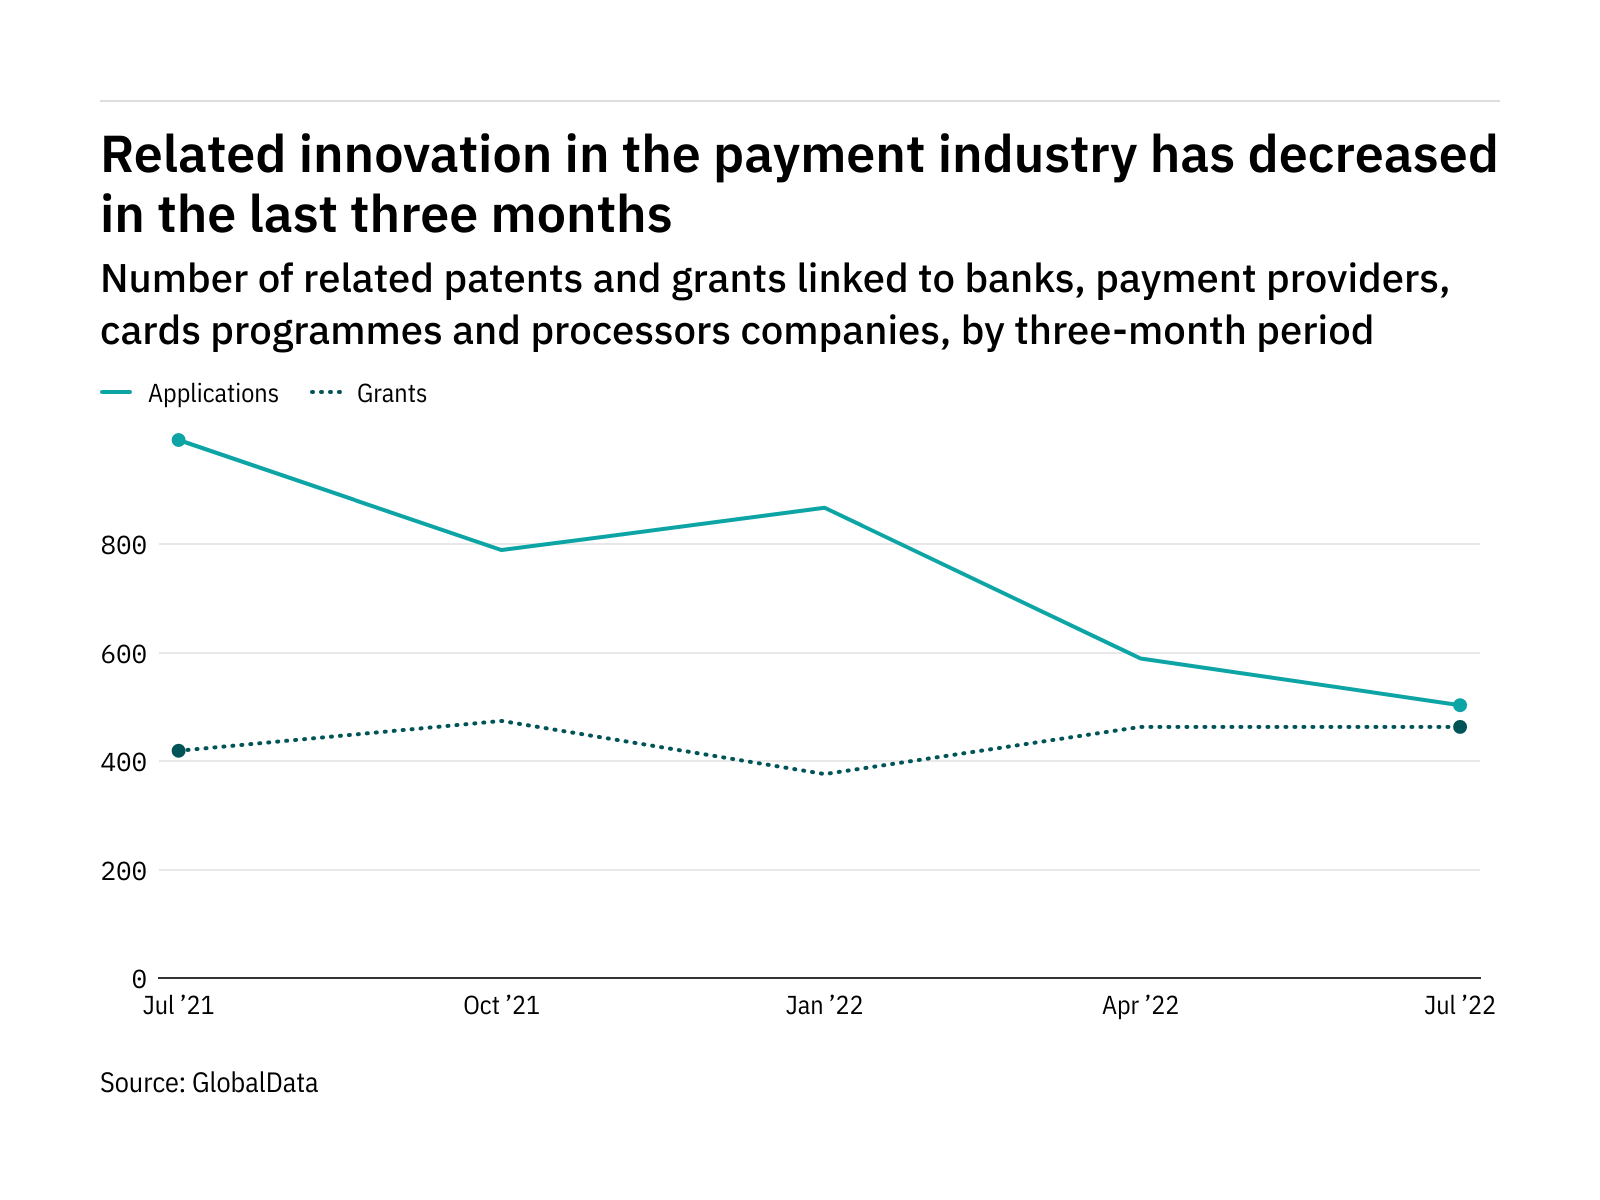 Cybersecurity innovation among payment industry companies has dropped off in the last three months